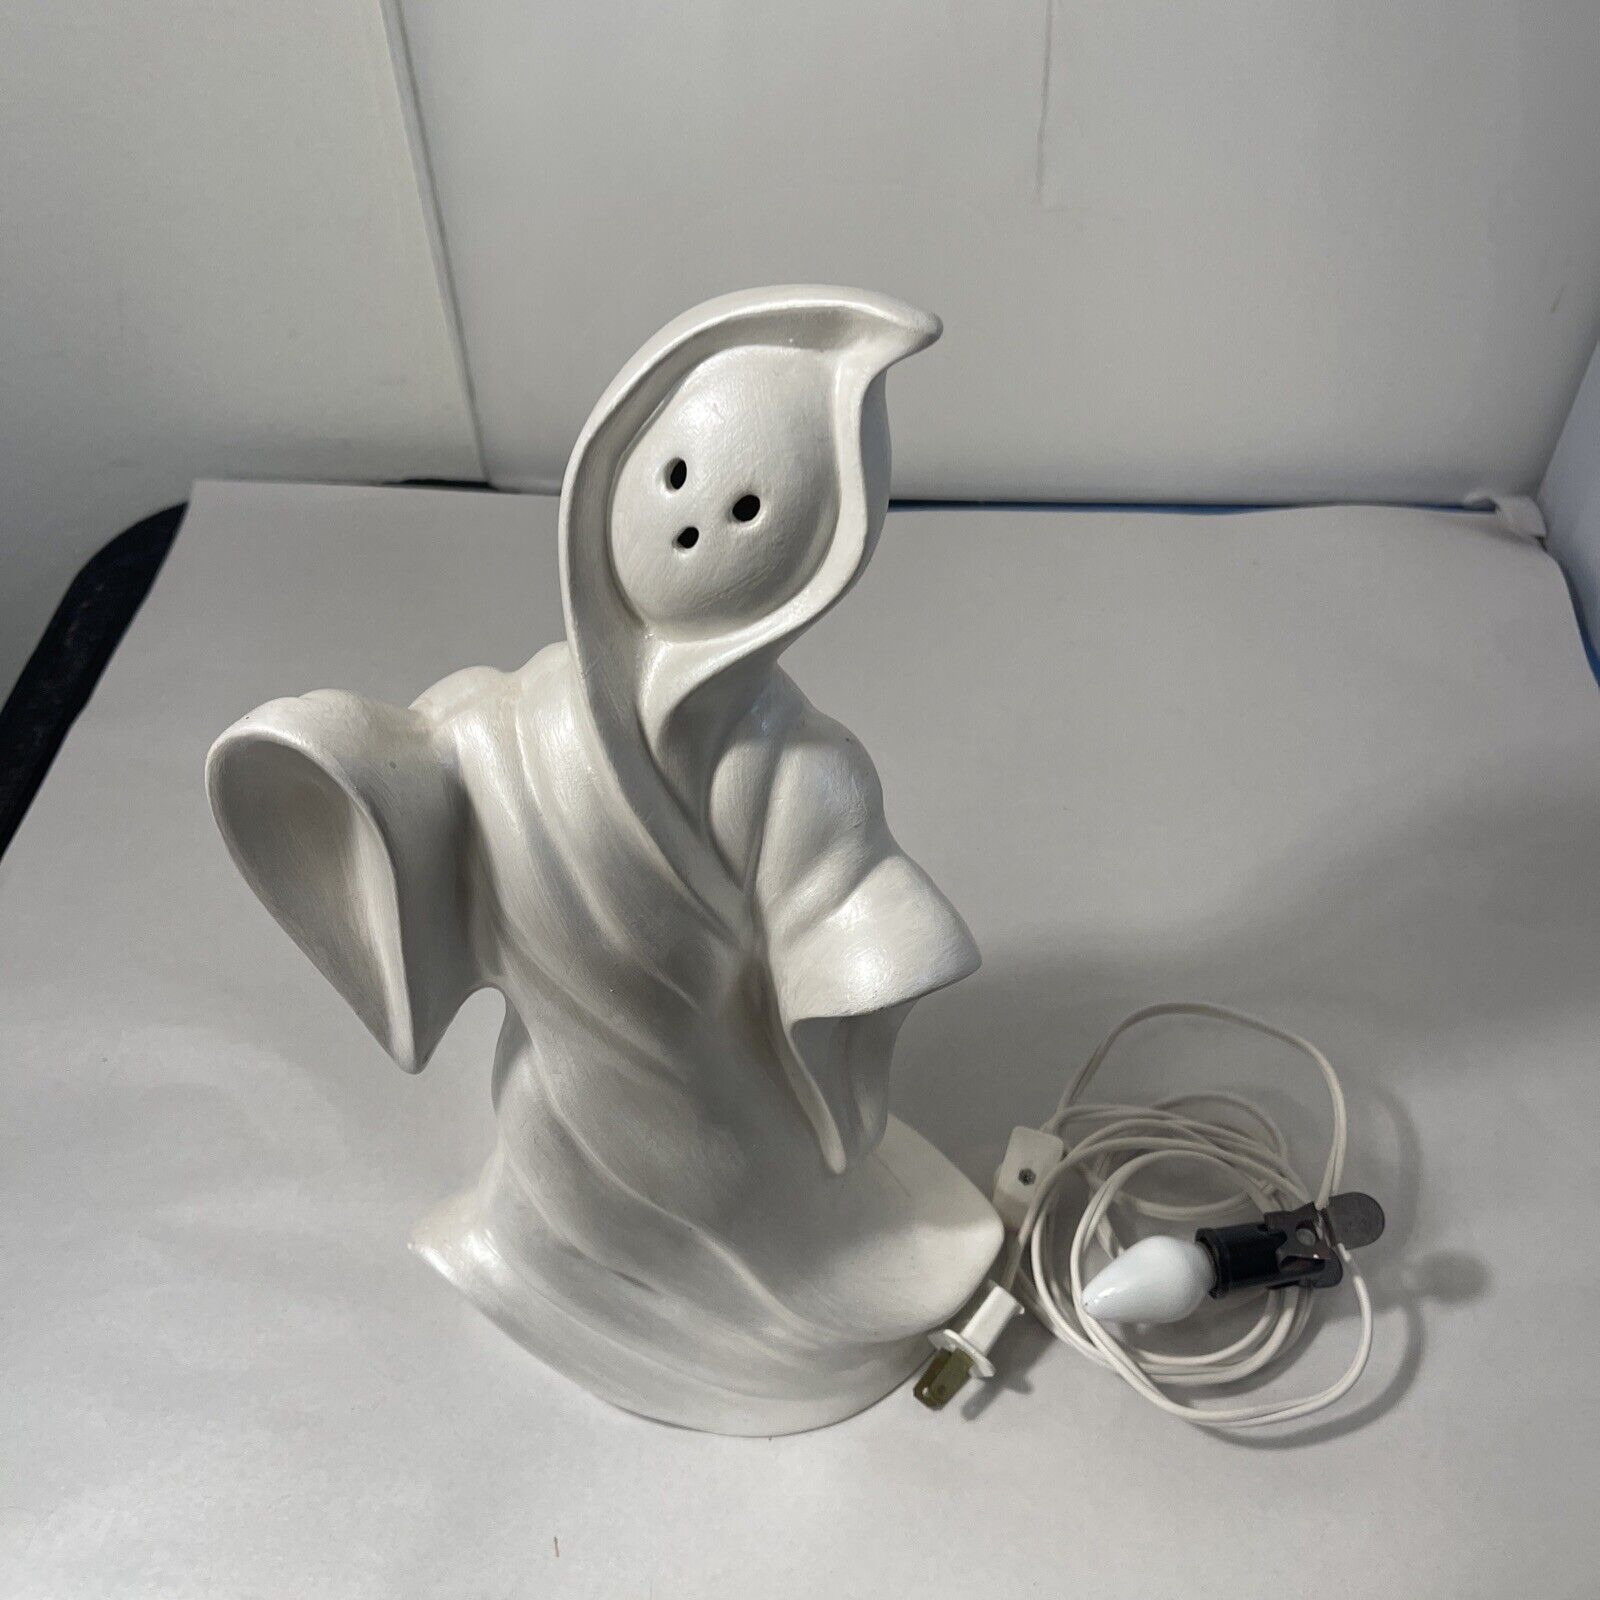 Vintage Ceramic Reaper Ghost Light-up Figurine with Light